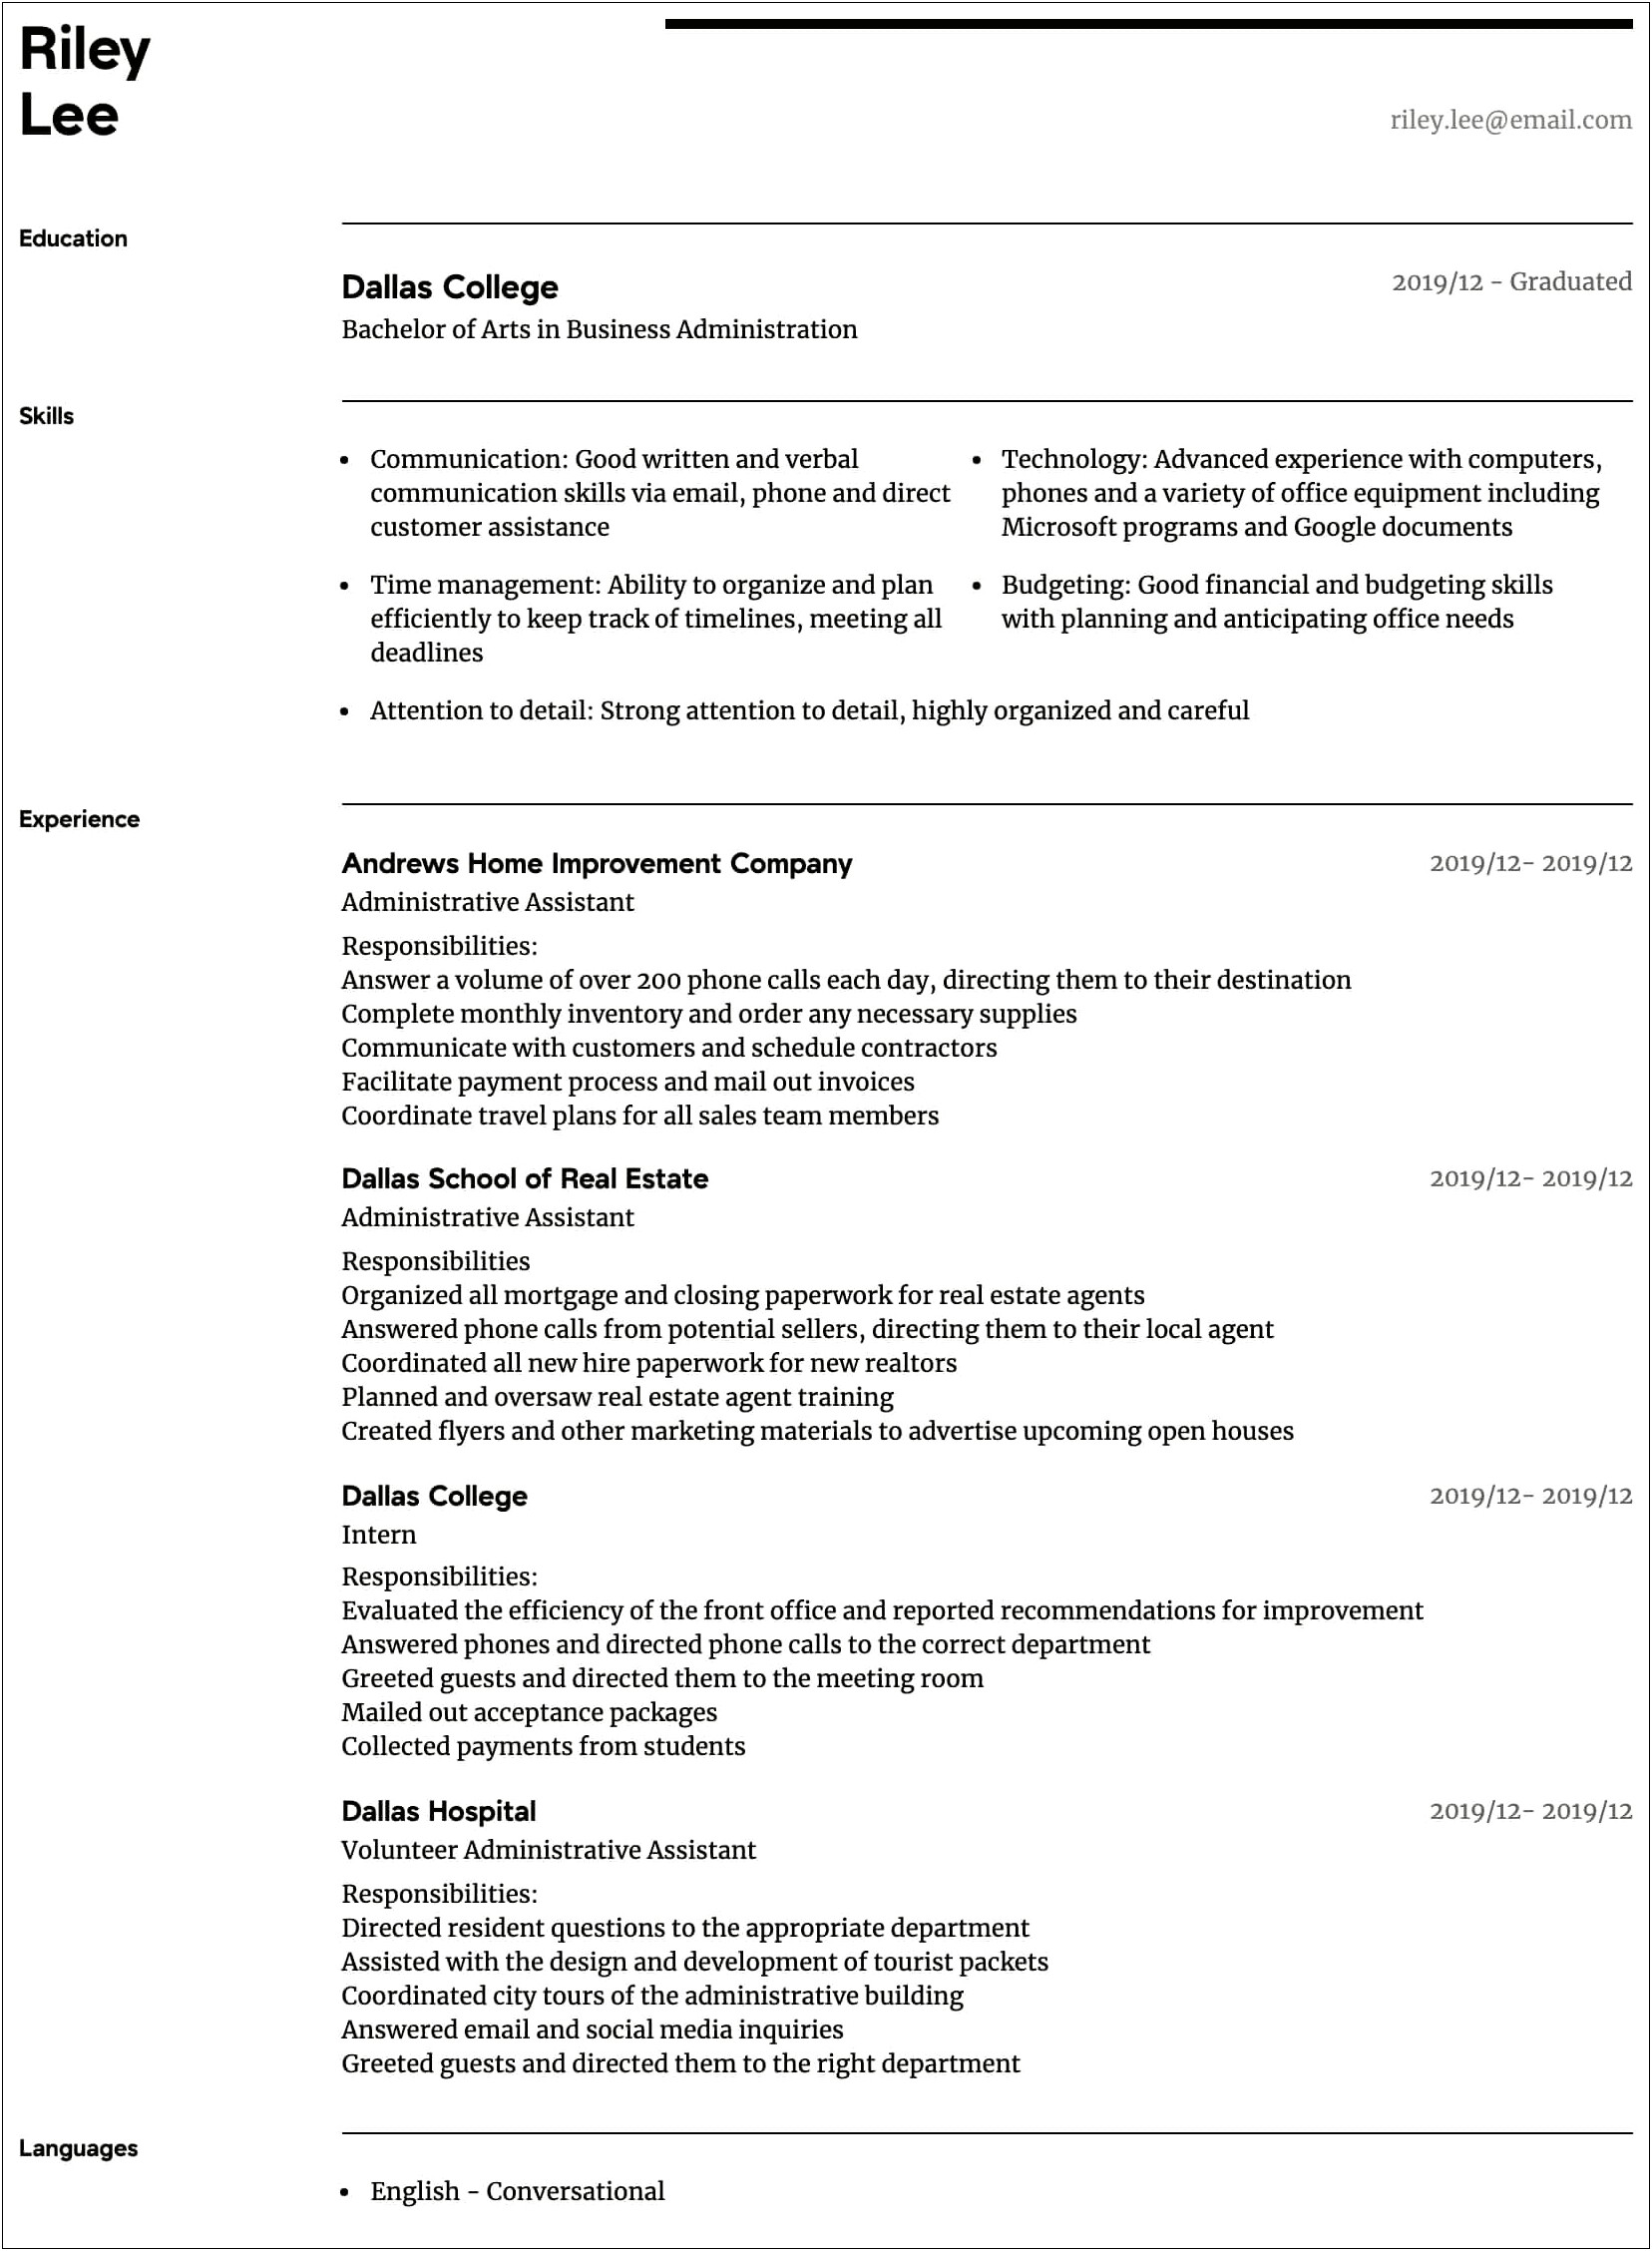 Administrative Assistant Objective For Resume Examples